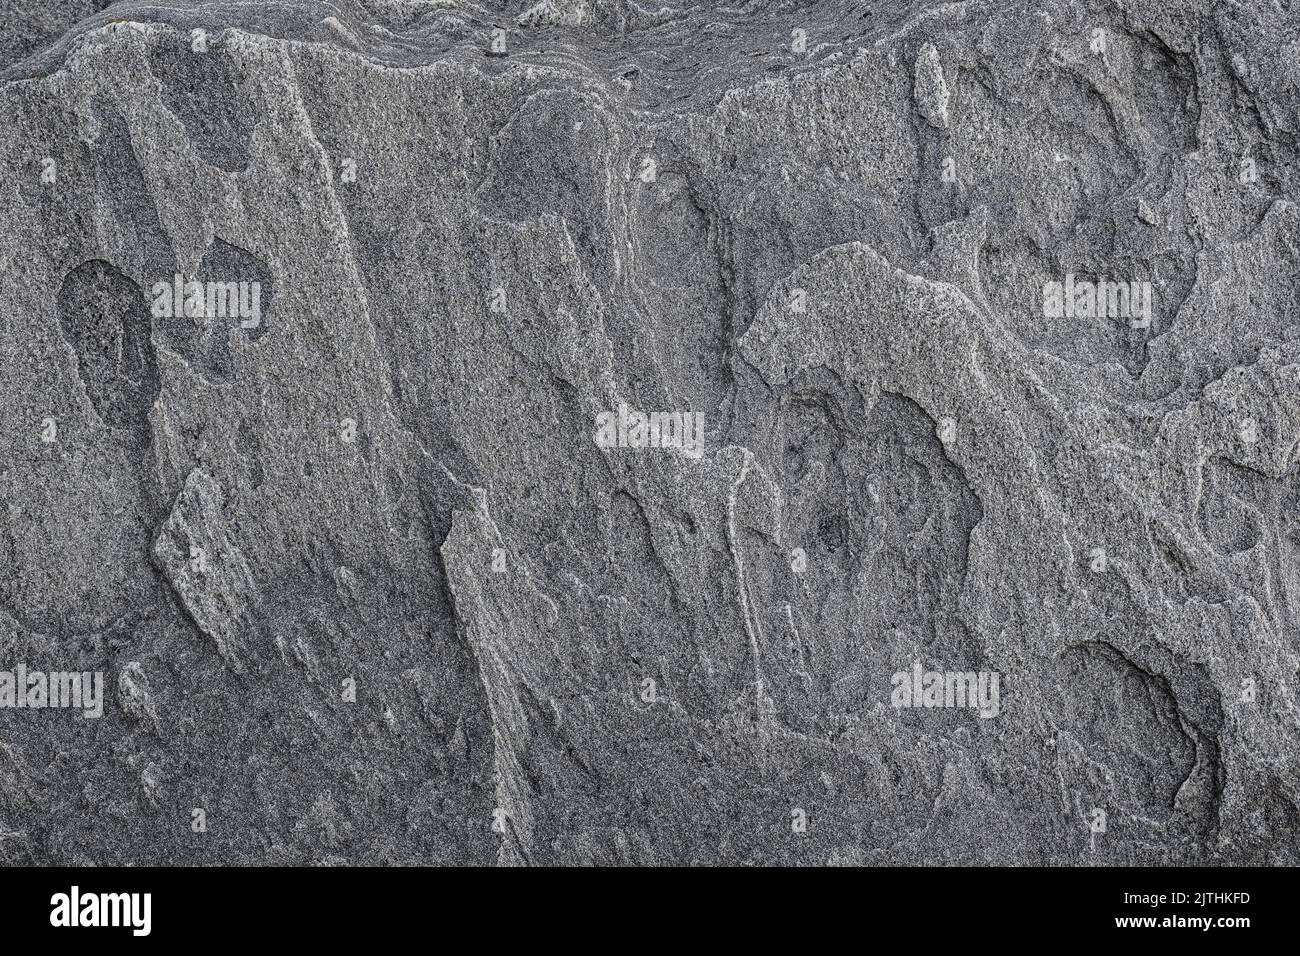 Close-up of a strange and beautiful rock surface, front view. Abstract full frame natural textured background in black and white. Stock Photo